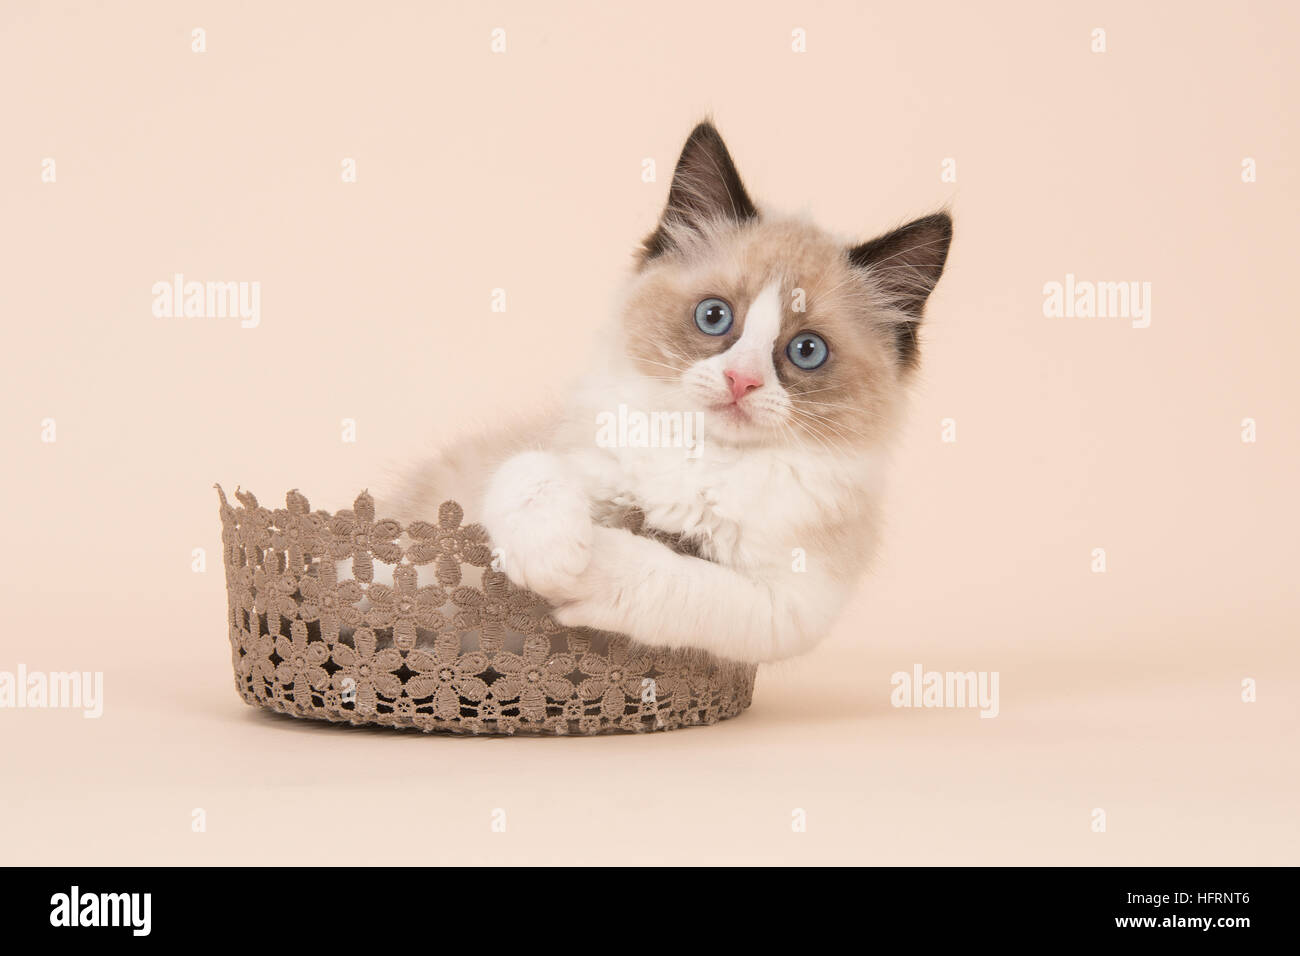 Cute ragdoll baby cat with blue eyes facing the camera sitting in a brown lace basket on a soft background Stock Photo